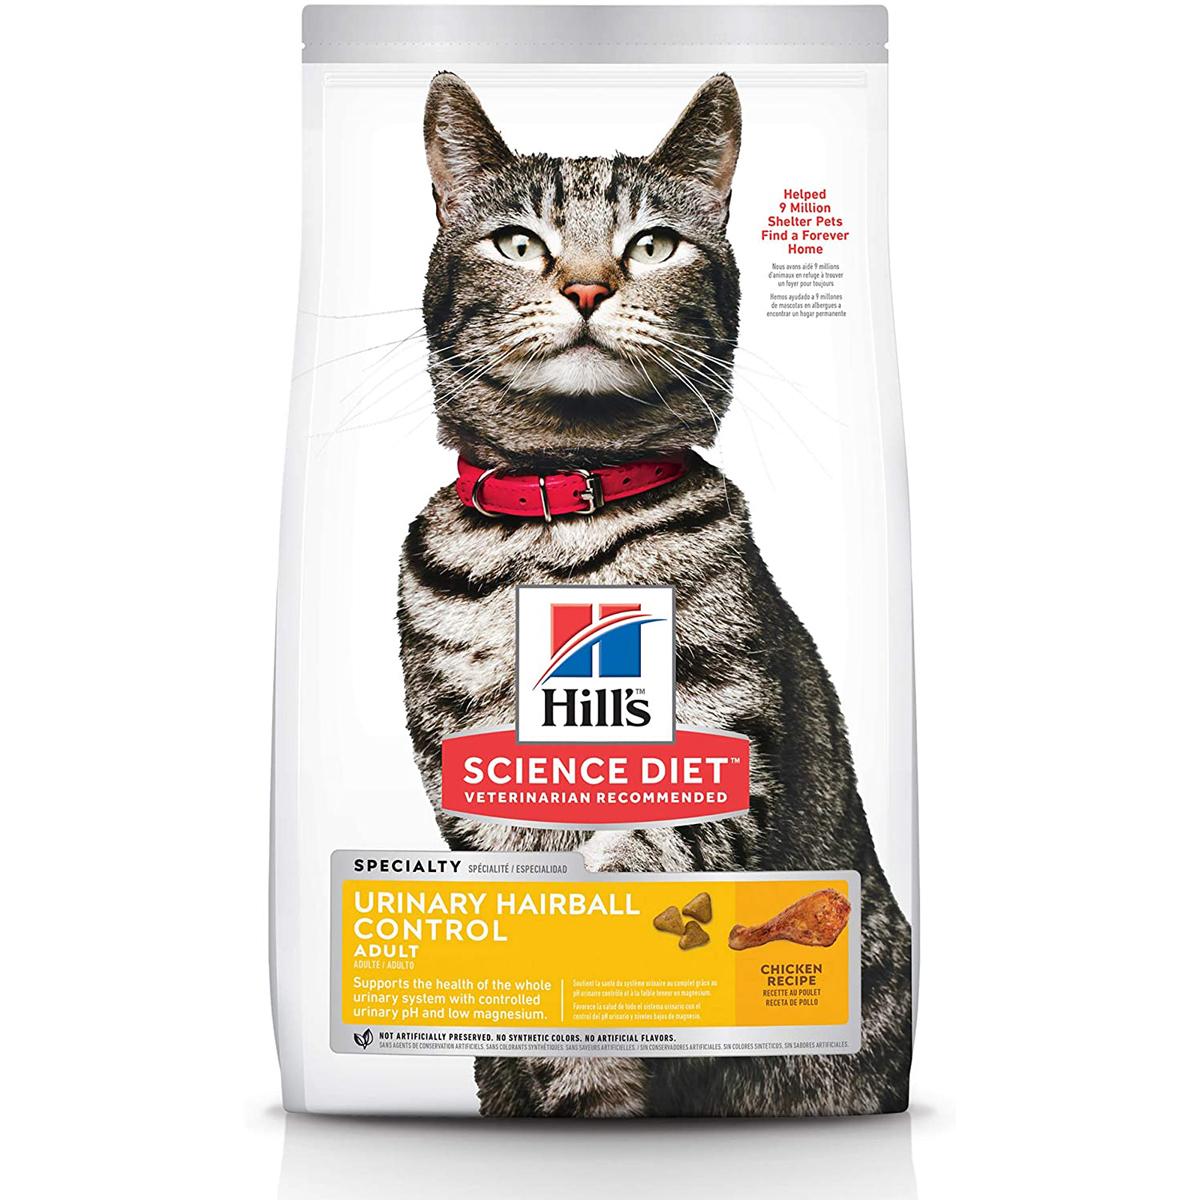 Hills Science Diet Dry Cat Food for $34.19 Shipped